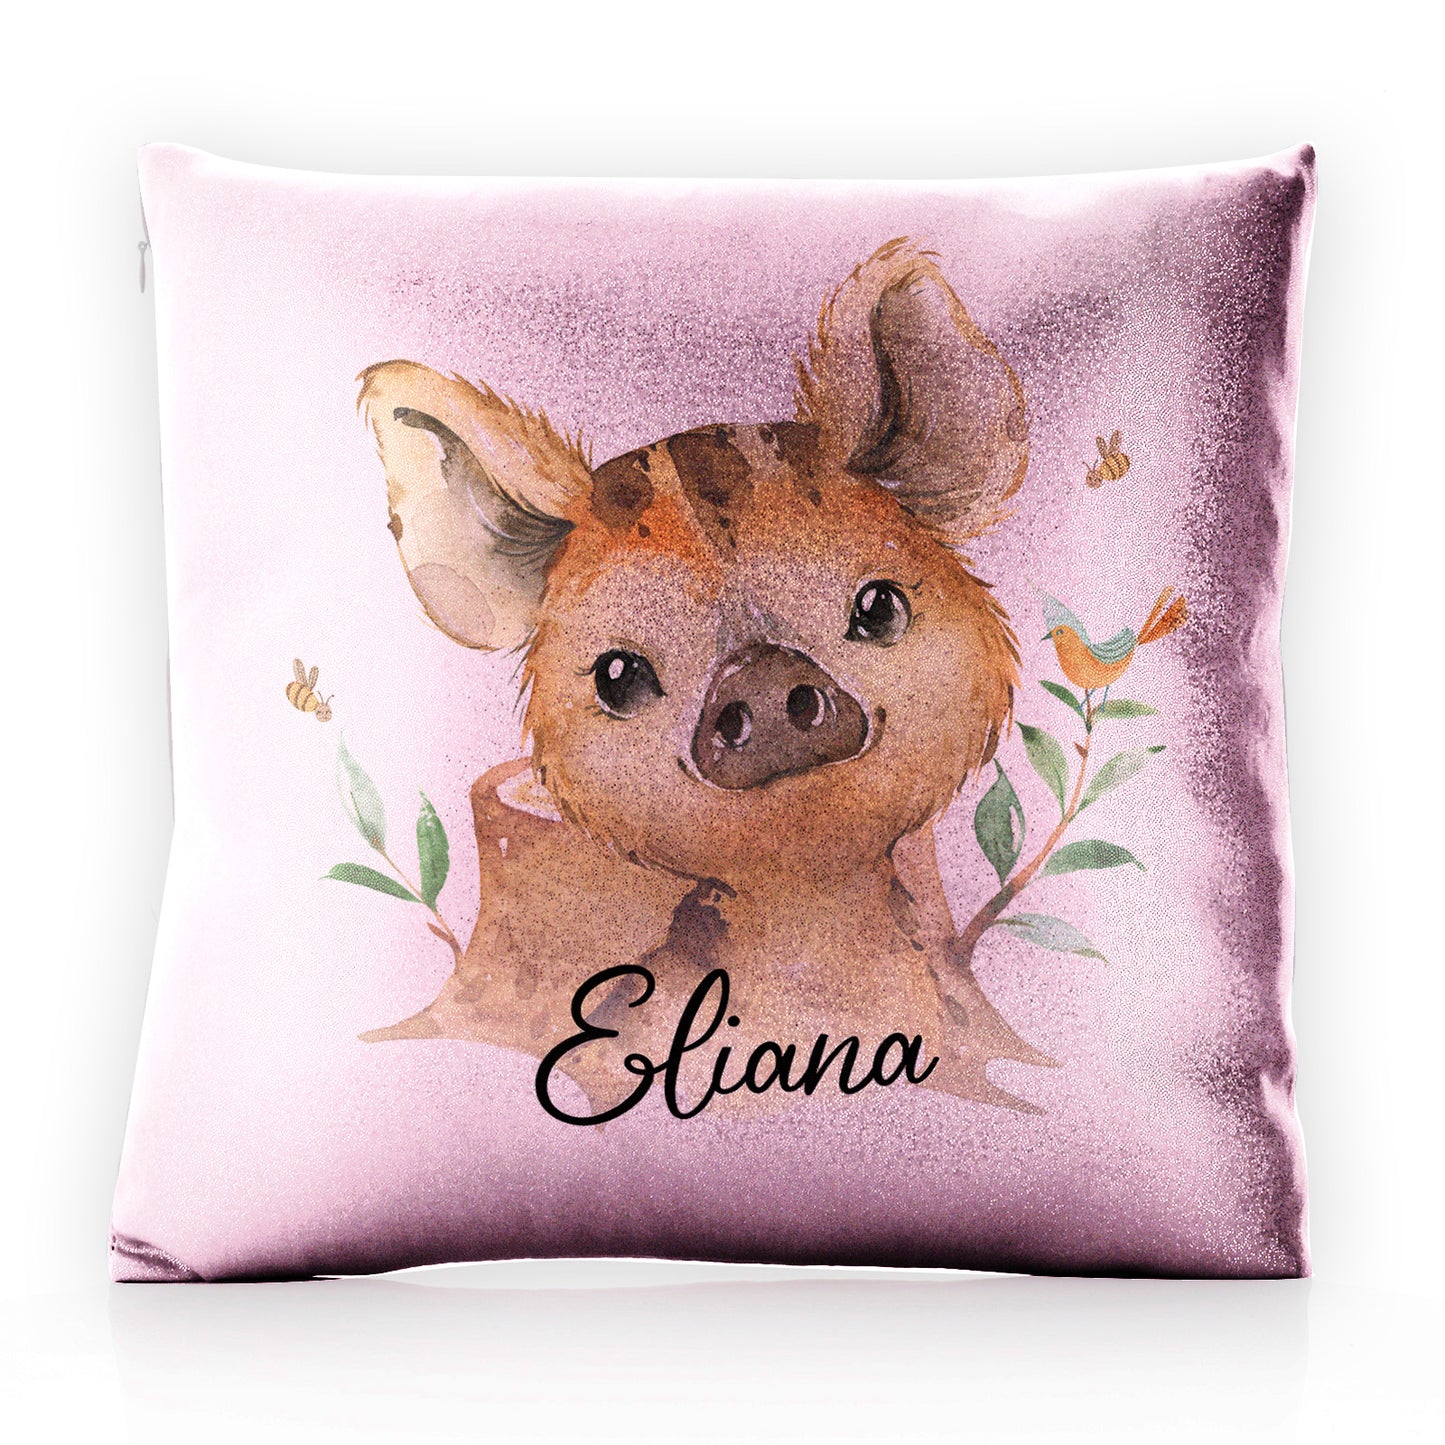 Personalised Glitter Cushion with Wild Boar Piglet with Bird and Bees and Cute Text